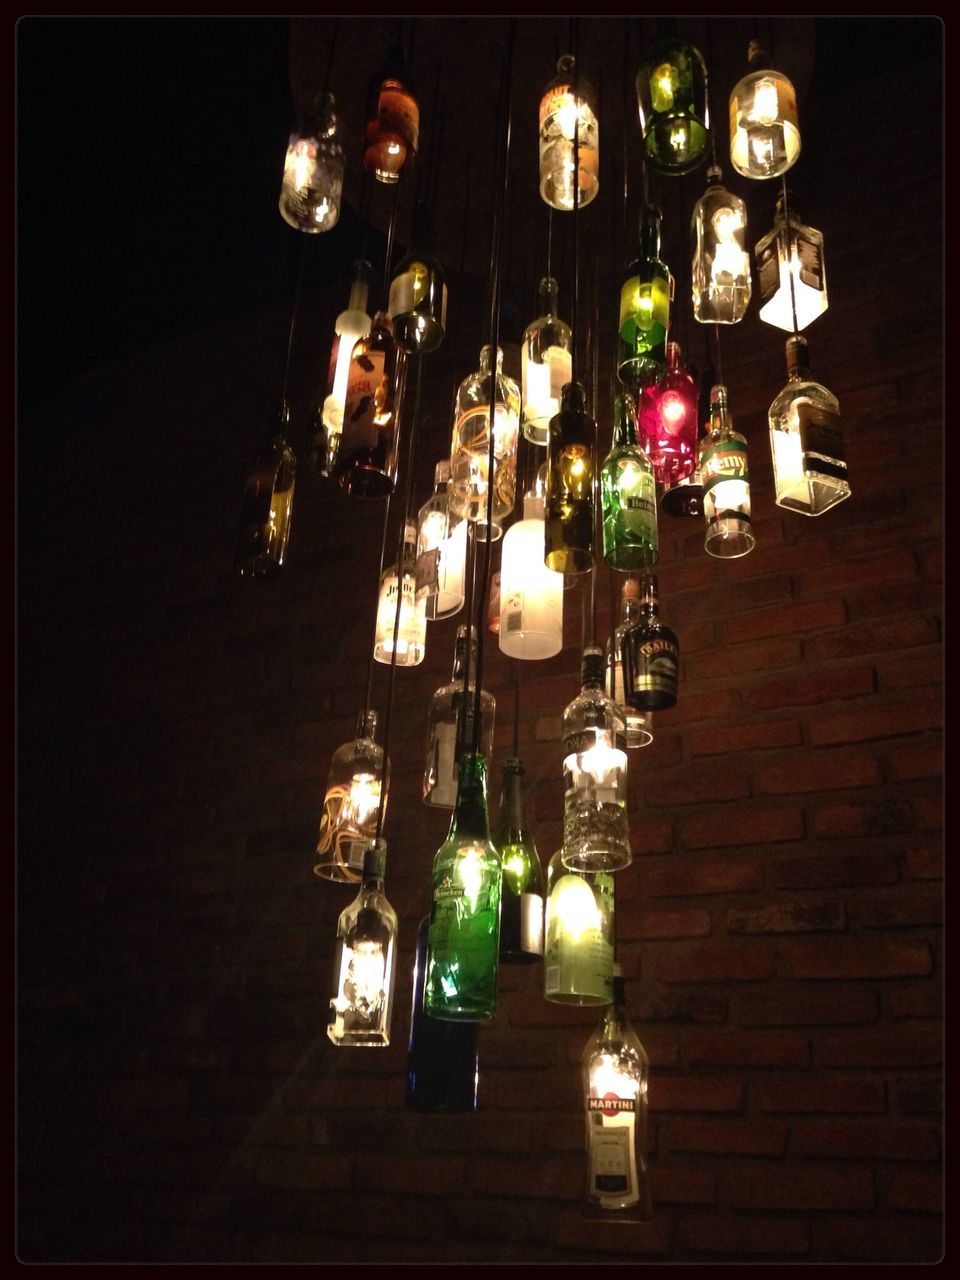 illuminated, indoors, lighting equipment, decoration, hanging, night, lantern, electricity, candle, in a row, arrangement, electric lamp, variation, wall - building feature, electric light, large group of objects, lamp, no people, glowing, still life